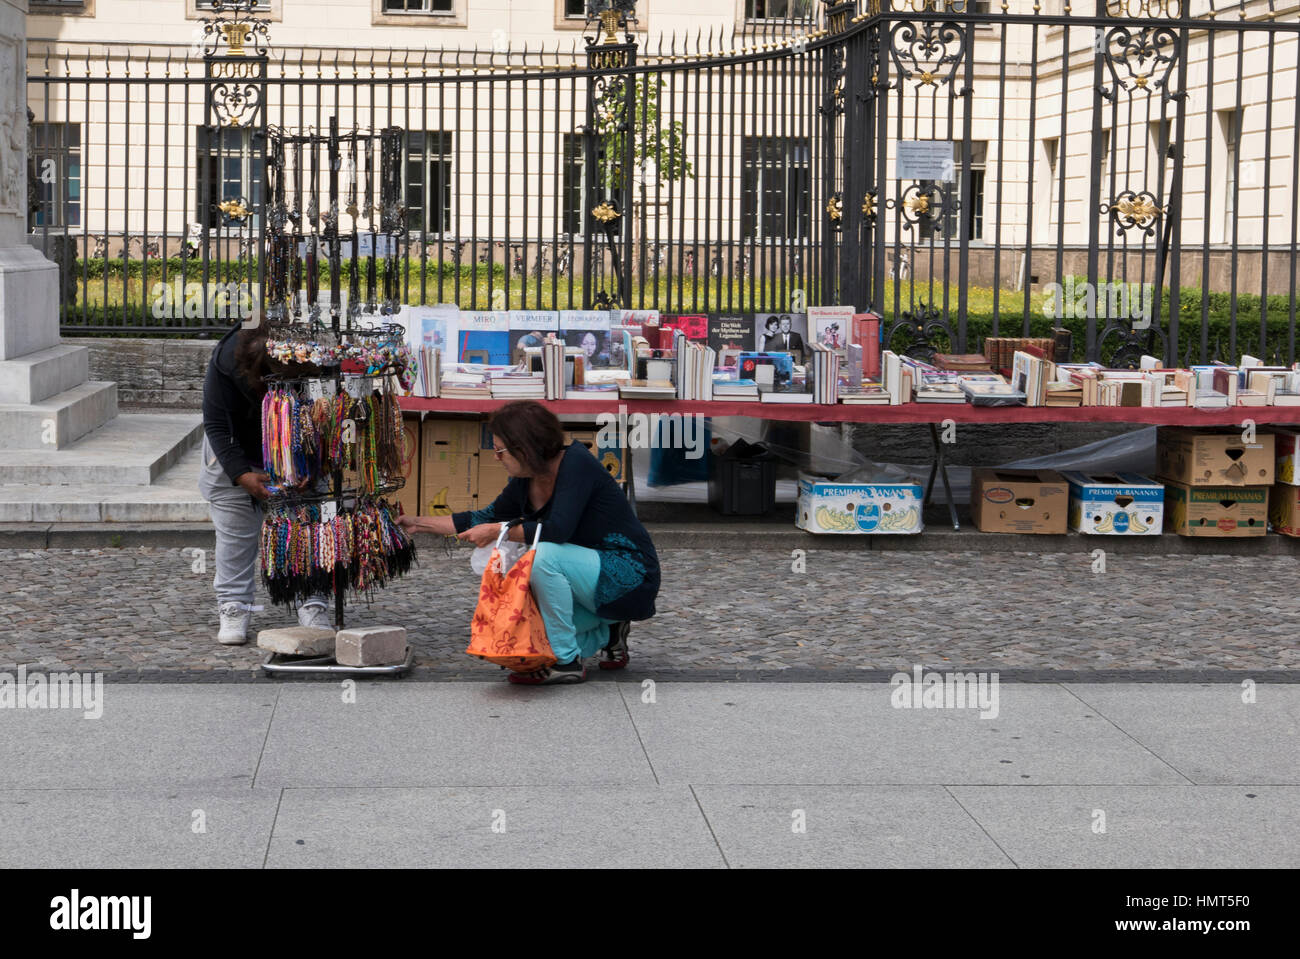 Two women looking at items on sale outside the  Humboldt University, Berlin, Germany Stock Photo